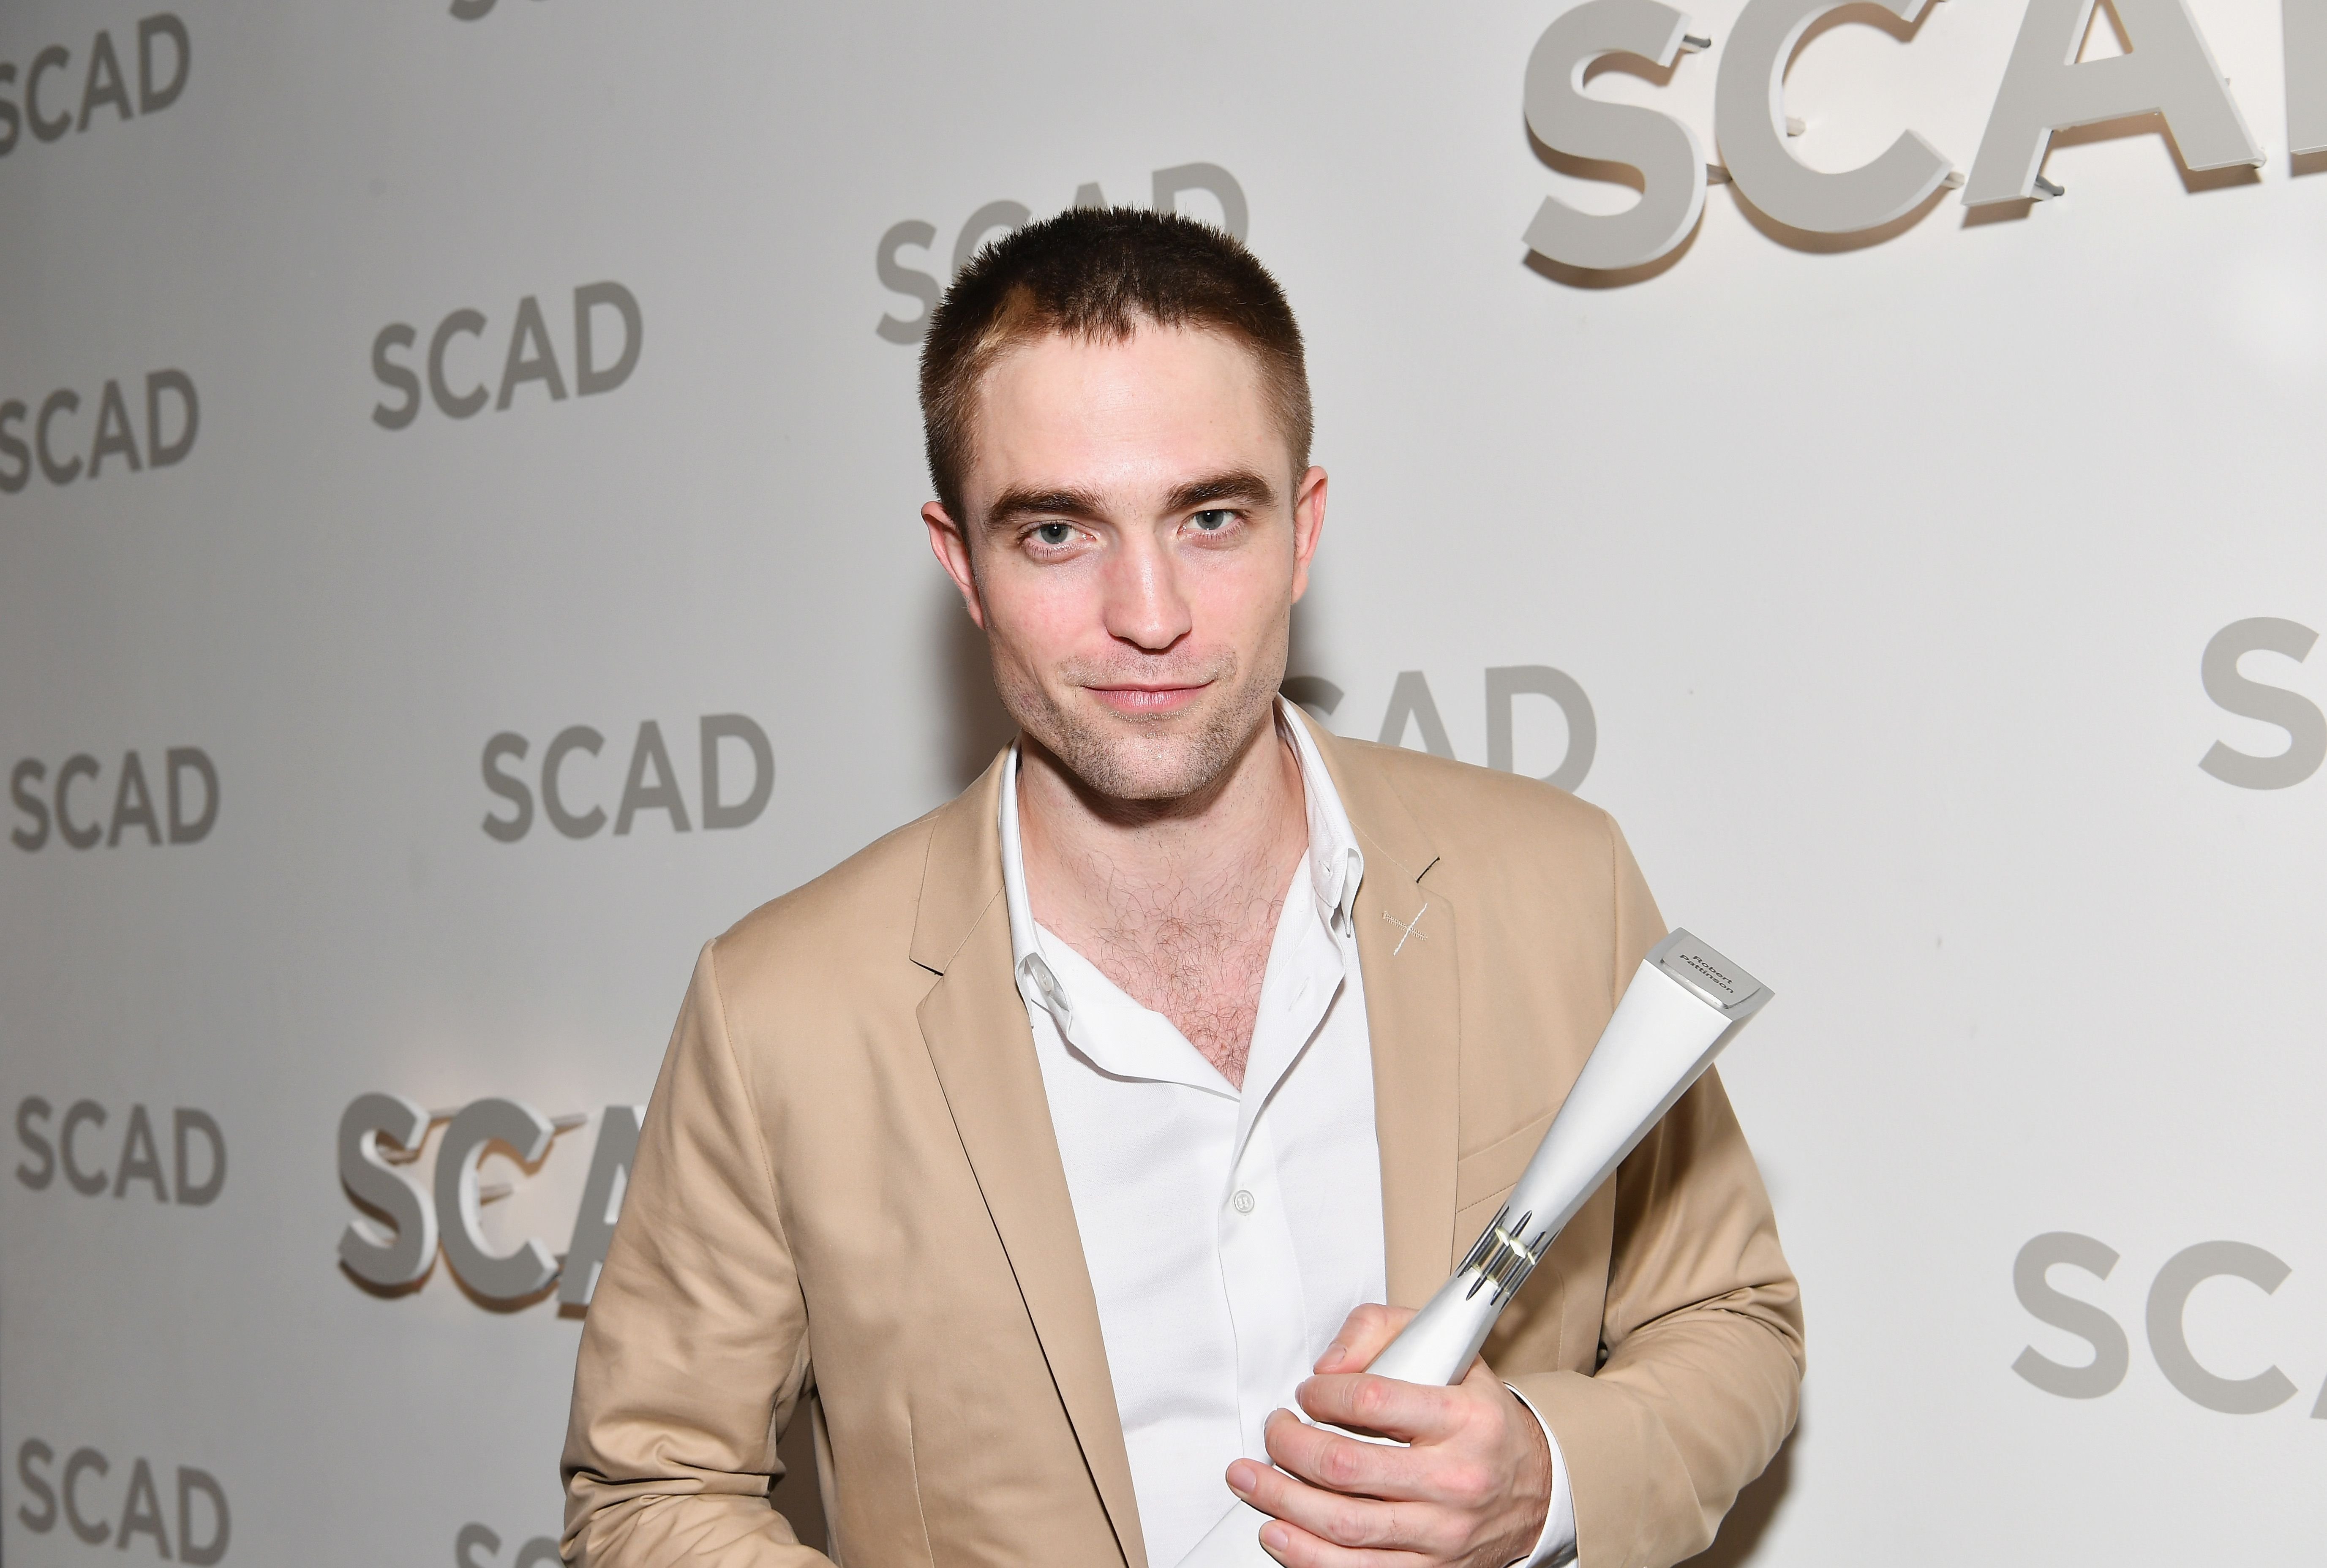 Robert Pattinson during the Trustees Theater during 20th Anniversary SCAD Savannah Film Festival on November 3, 2017 in Savannah, Georgia. | Source: Getty Images